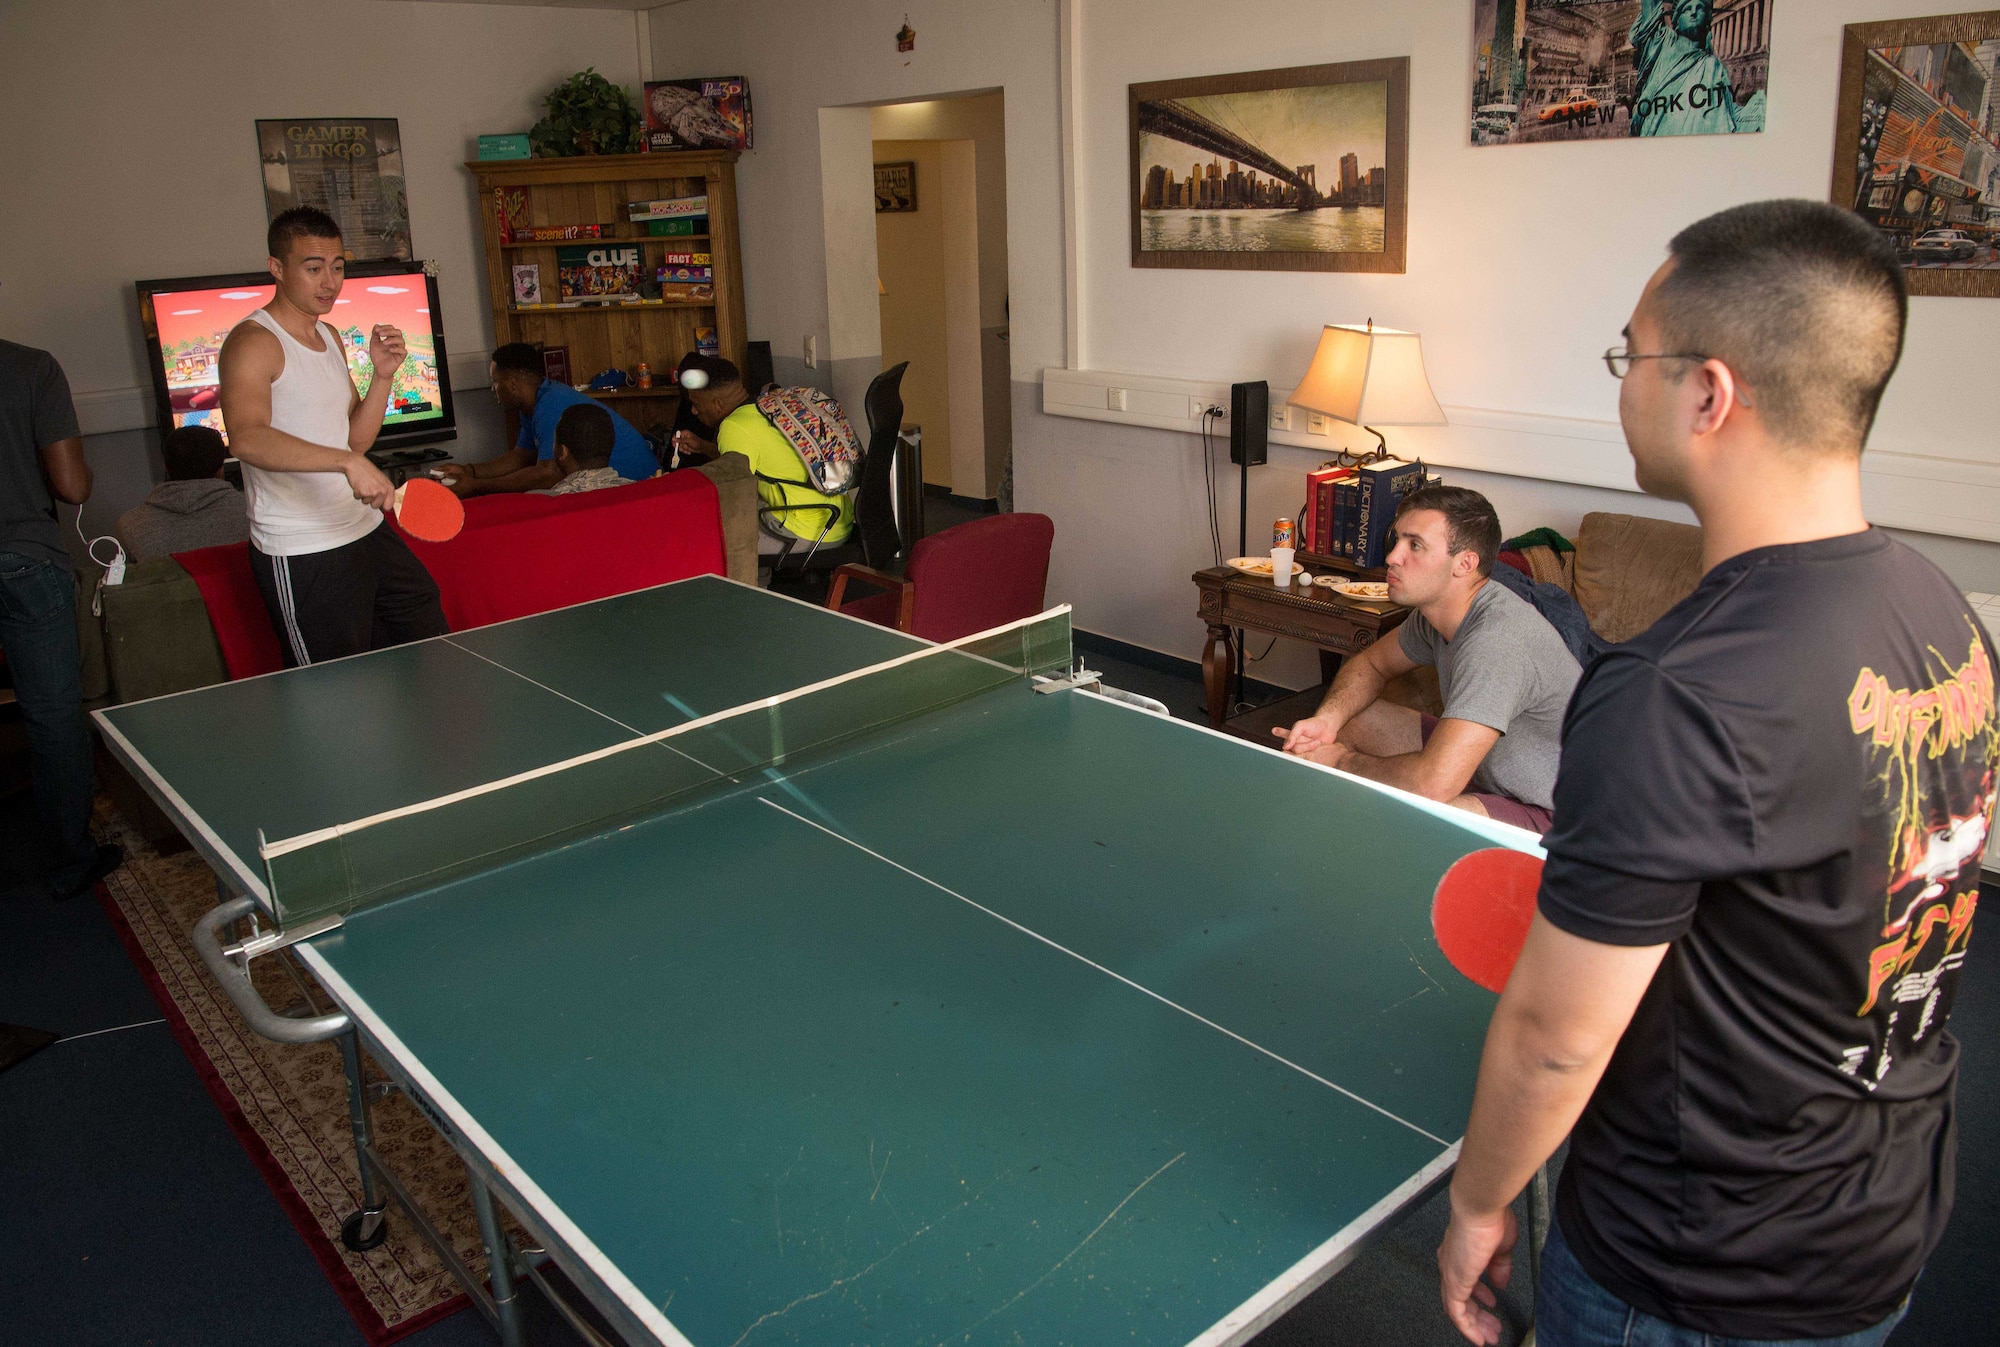 Airmen play ping pong in the game room at Club 7 on Ramstein Air Base, June 10, 2017. The 86th Airlift Wing Chapel’s Airmen Ministry Center runs Club 7 locations on Ramstein and Kapaun Air Station with the goal of providing junior enlisted Airmen a safe “home away from home” atmosphere where they can relax and make friends. (U.S. Air Force photo by Senior Airman Elizabeth Baker)